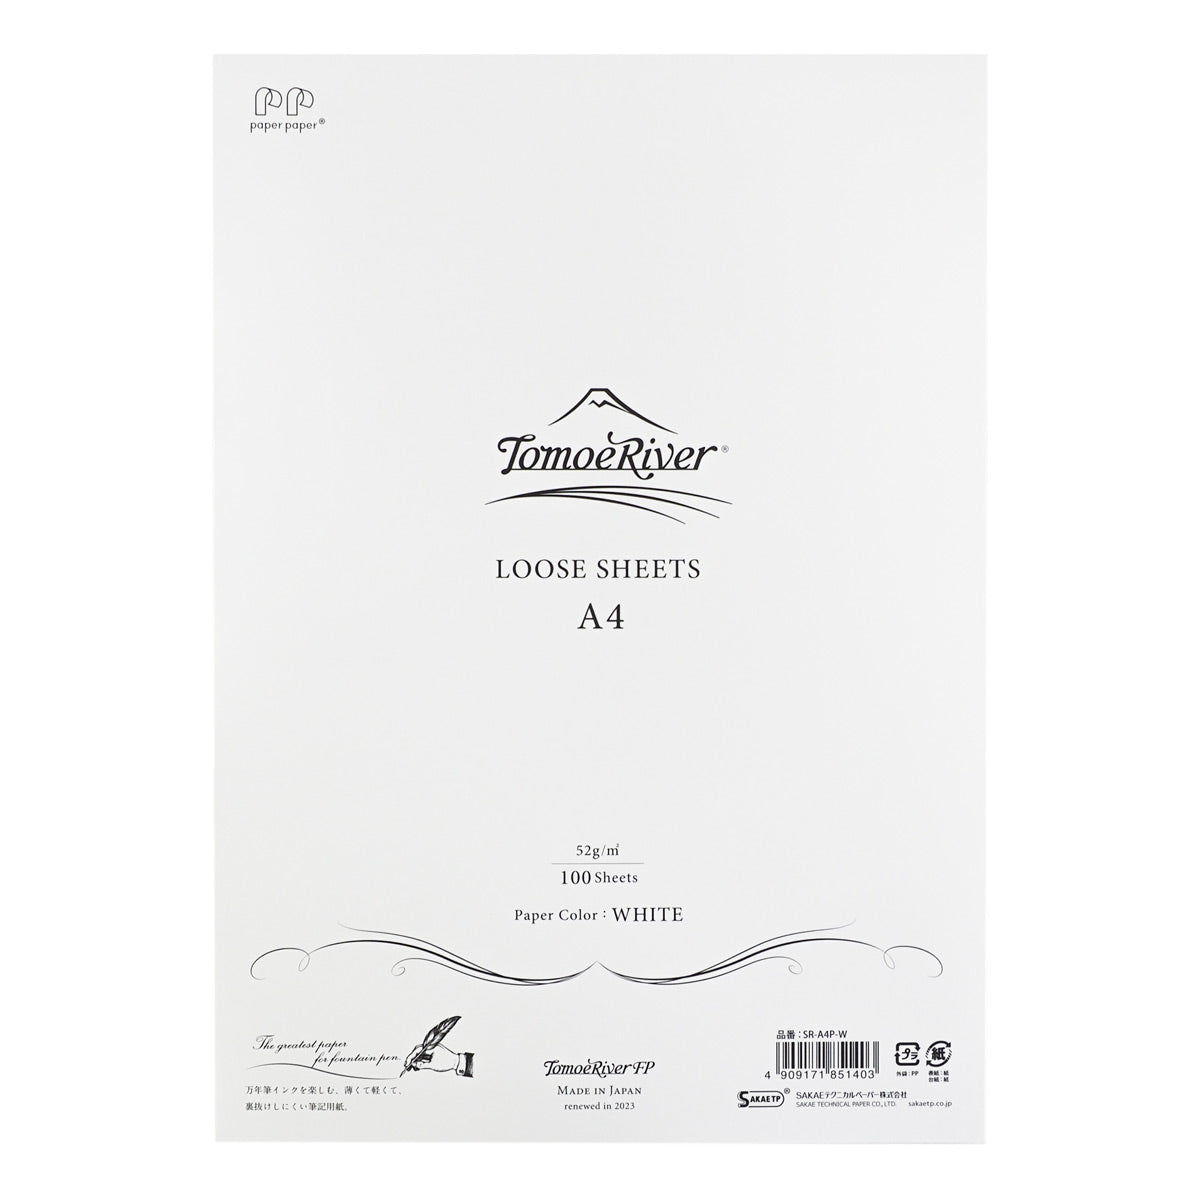 Tomoe River paper: Din A4 loose sheets white